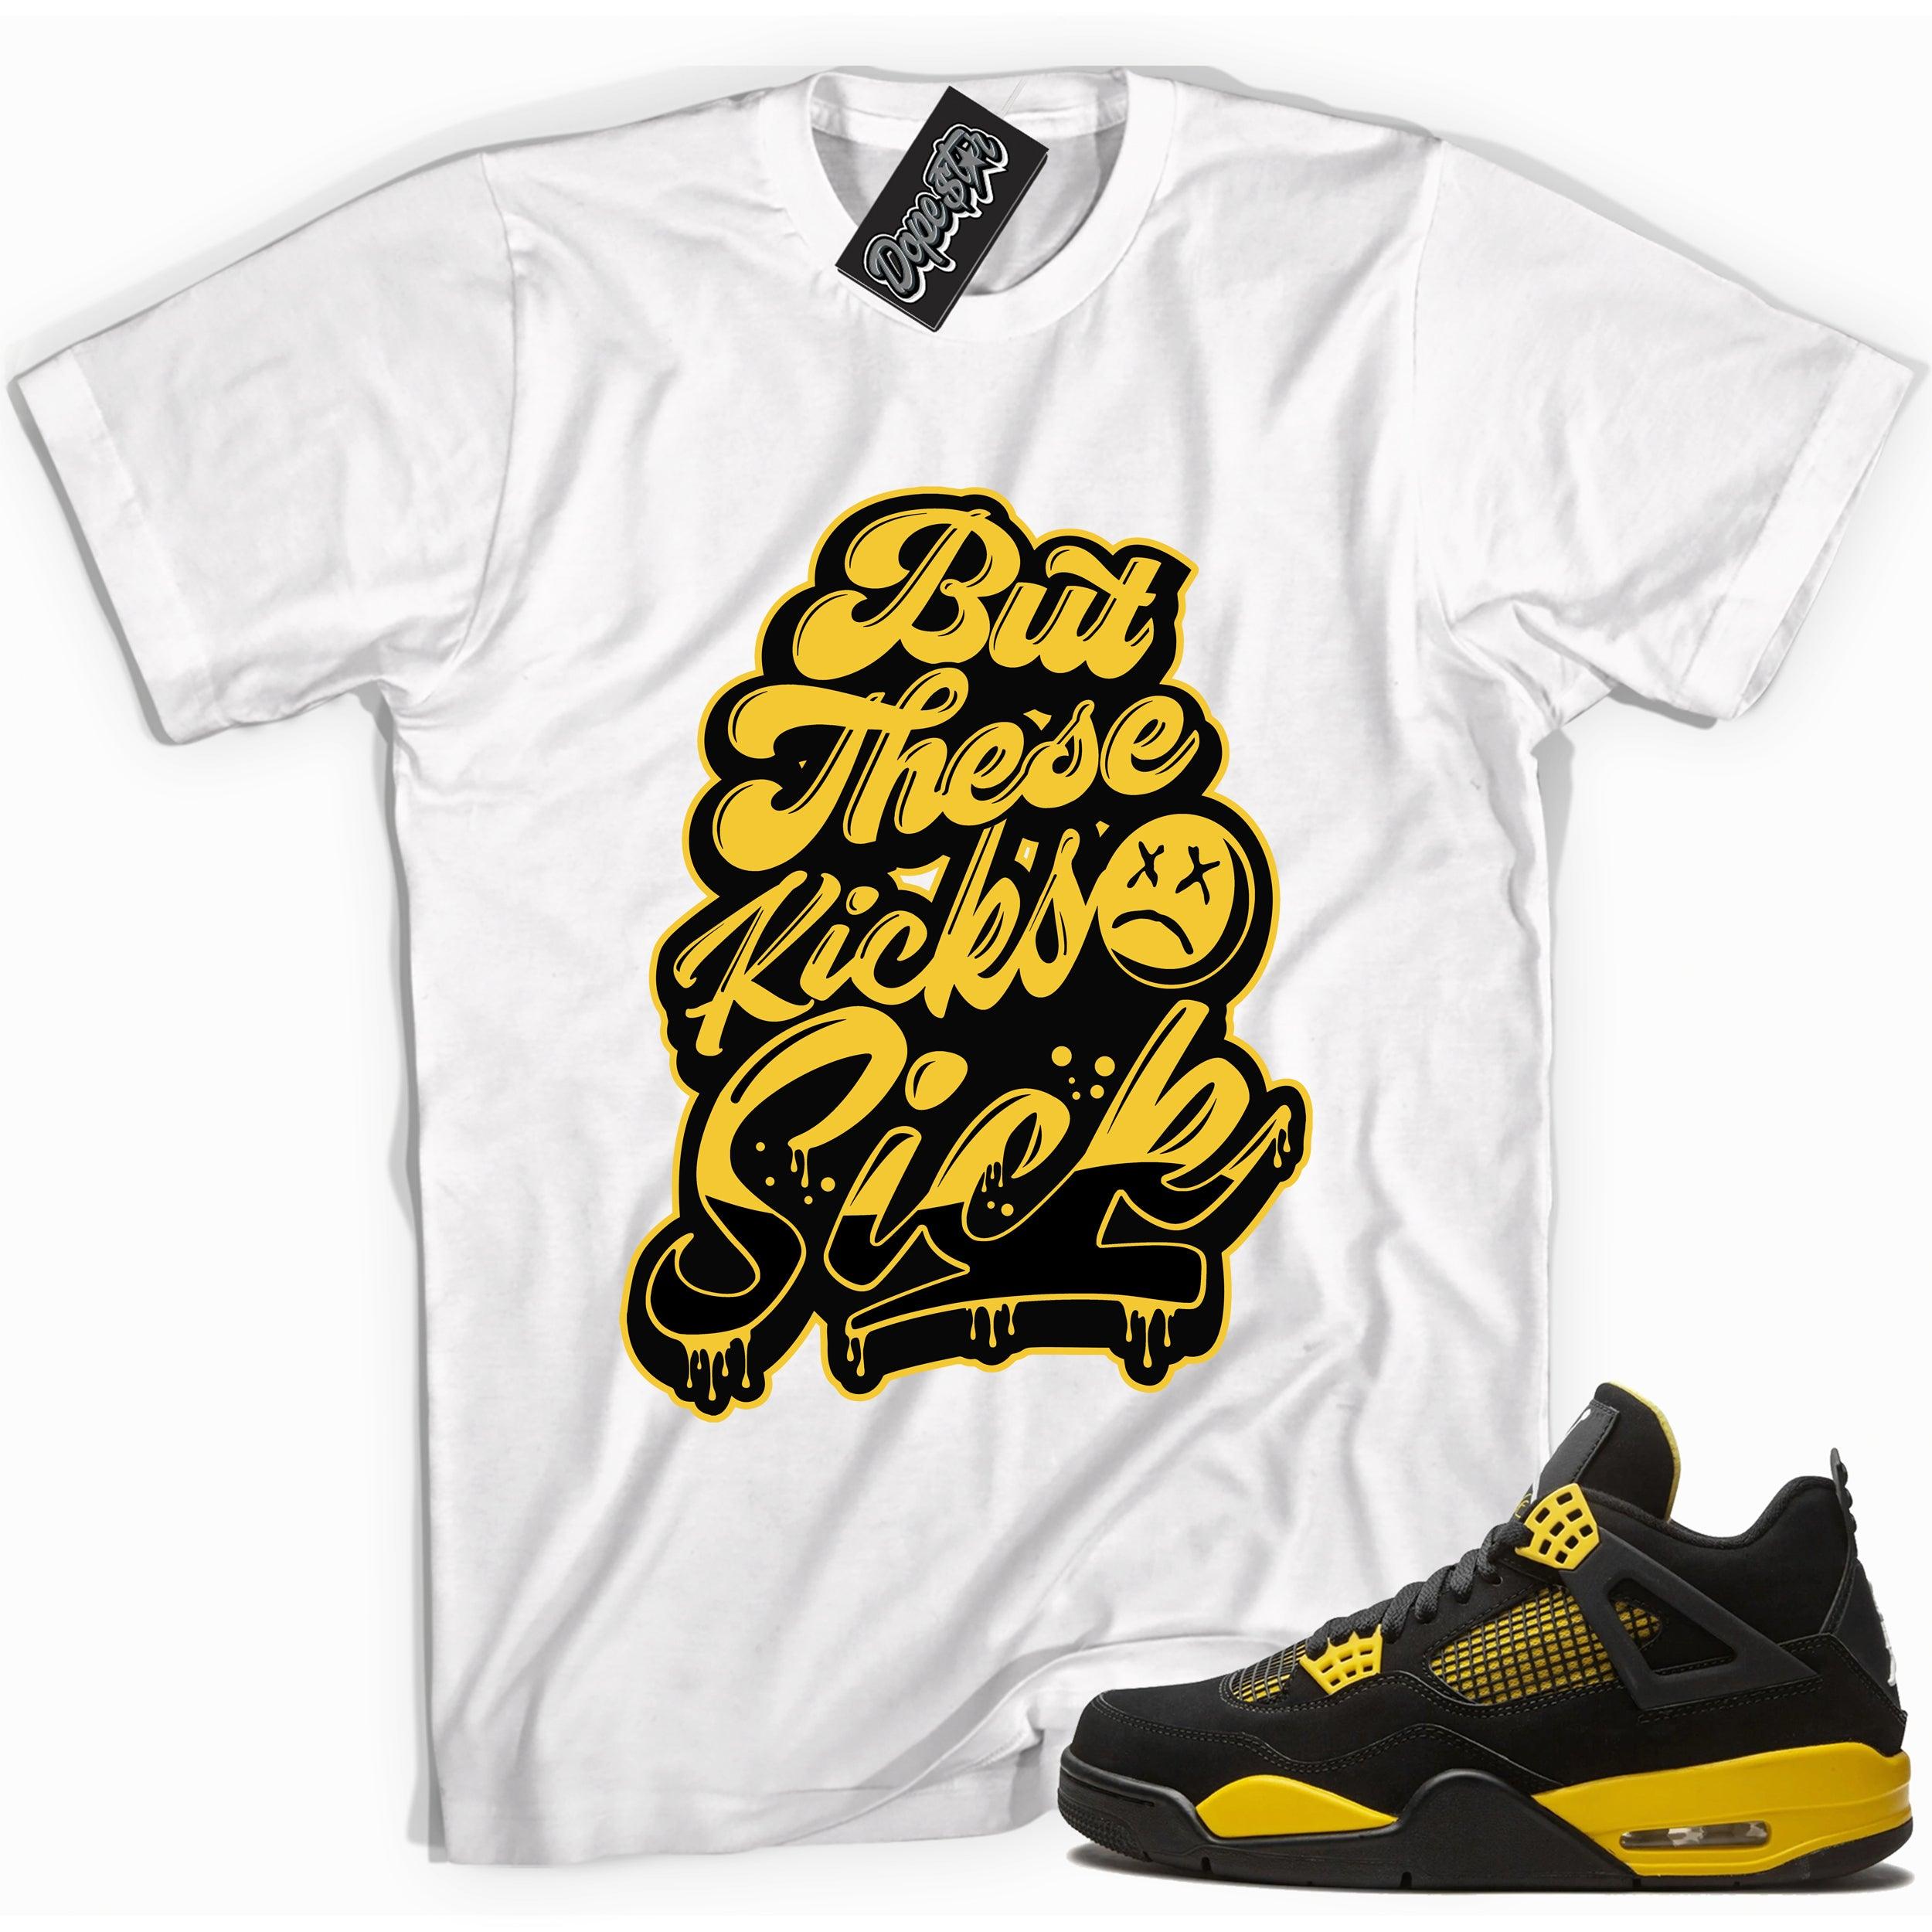 Cool white graphic tee with 'but these kicks sick' print, that perfectly matches Air Jordan 4 Thunder sneakers